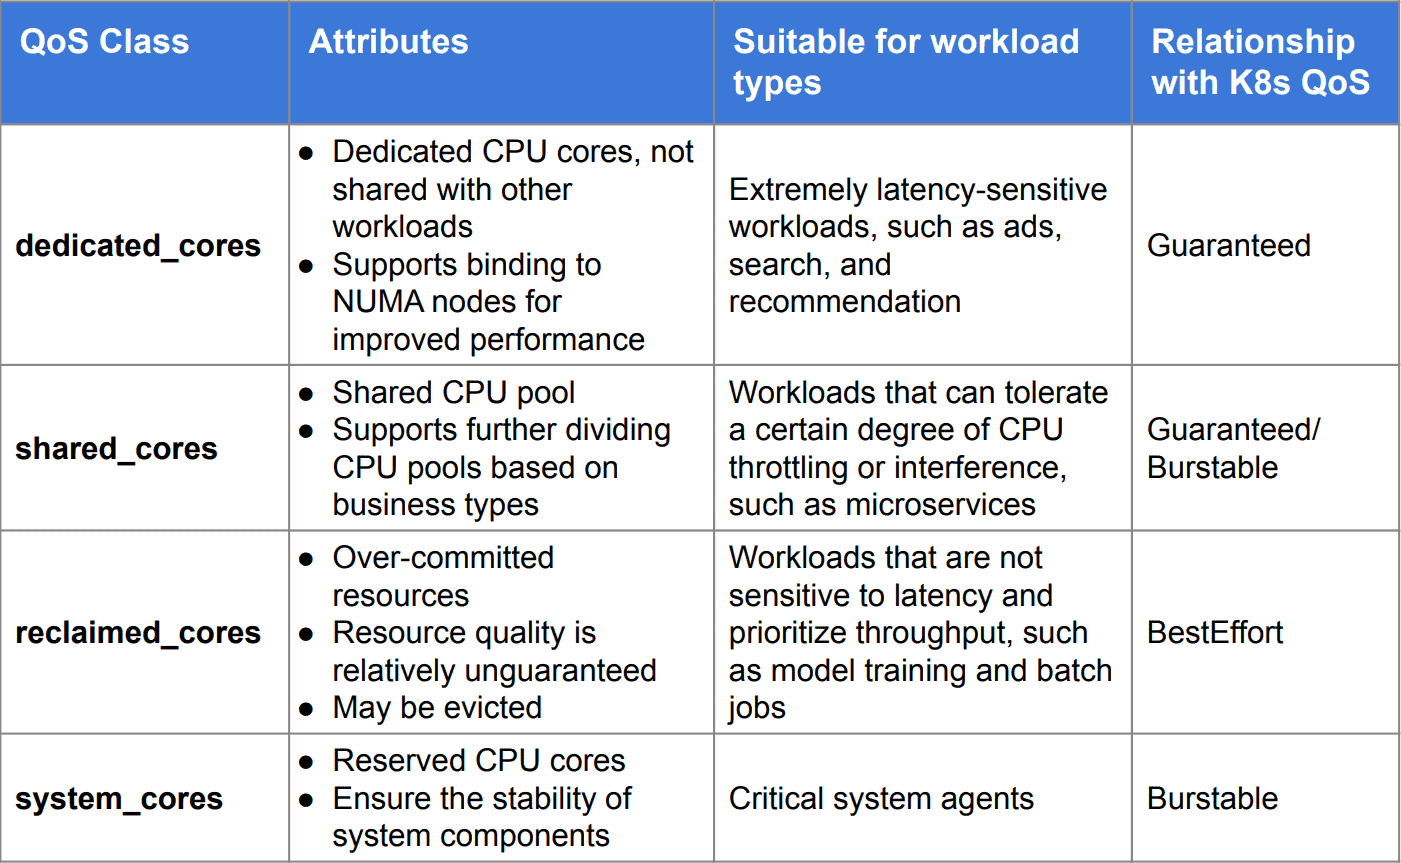 Table showing QoS class for dedicated_cores, shared_cores, reclaimed_cores, system_cores and its attributes, suitable for workload types, relationship with K8s QoS